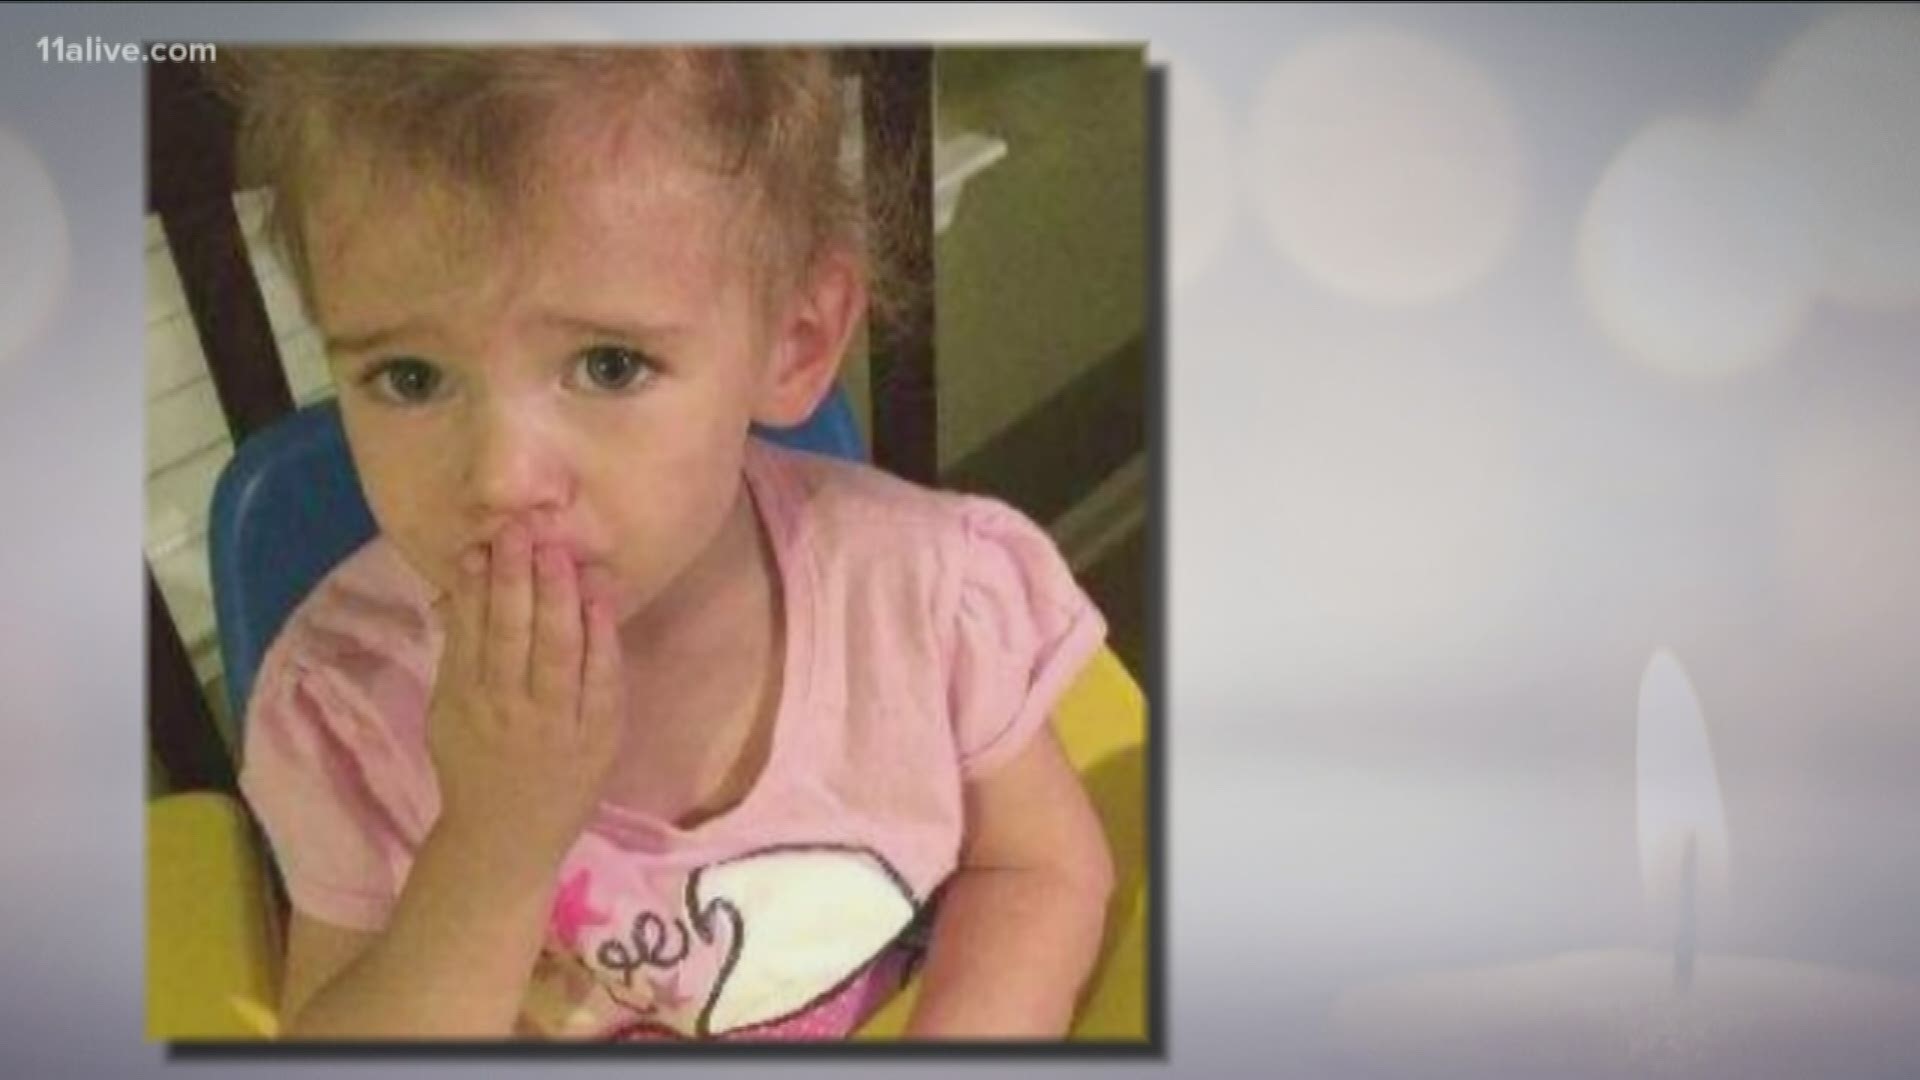 Four years after 2-year-old Laila Daniel’s death, the murder trial is beginning for her foster parents.